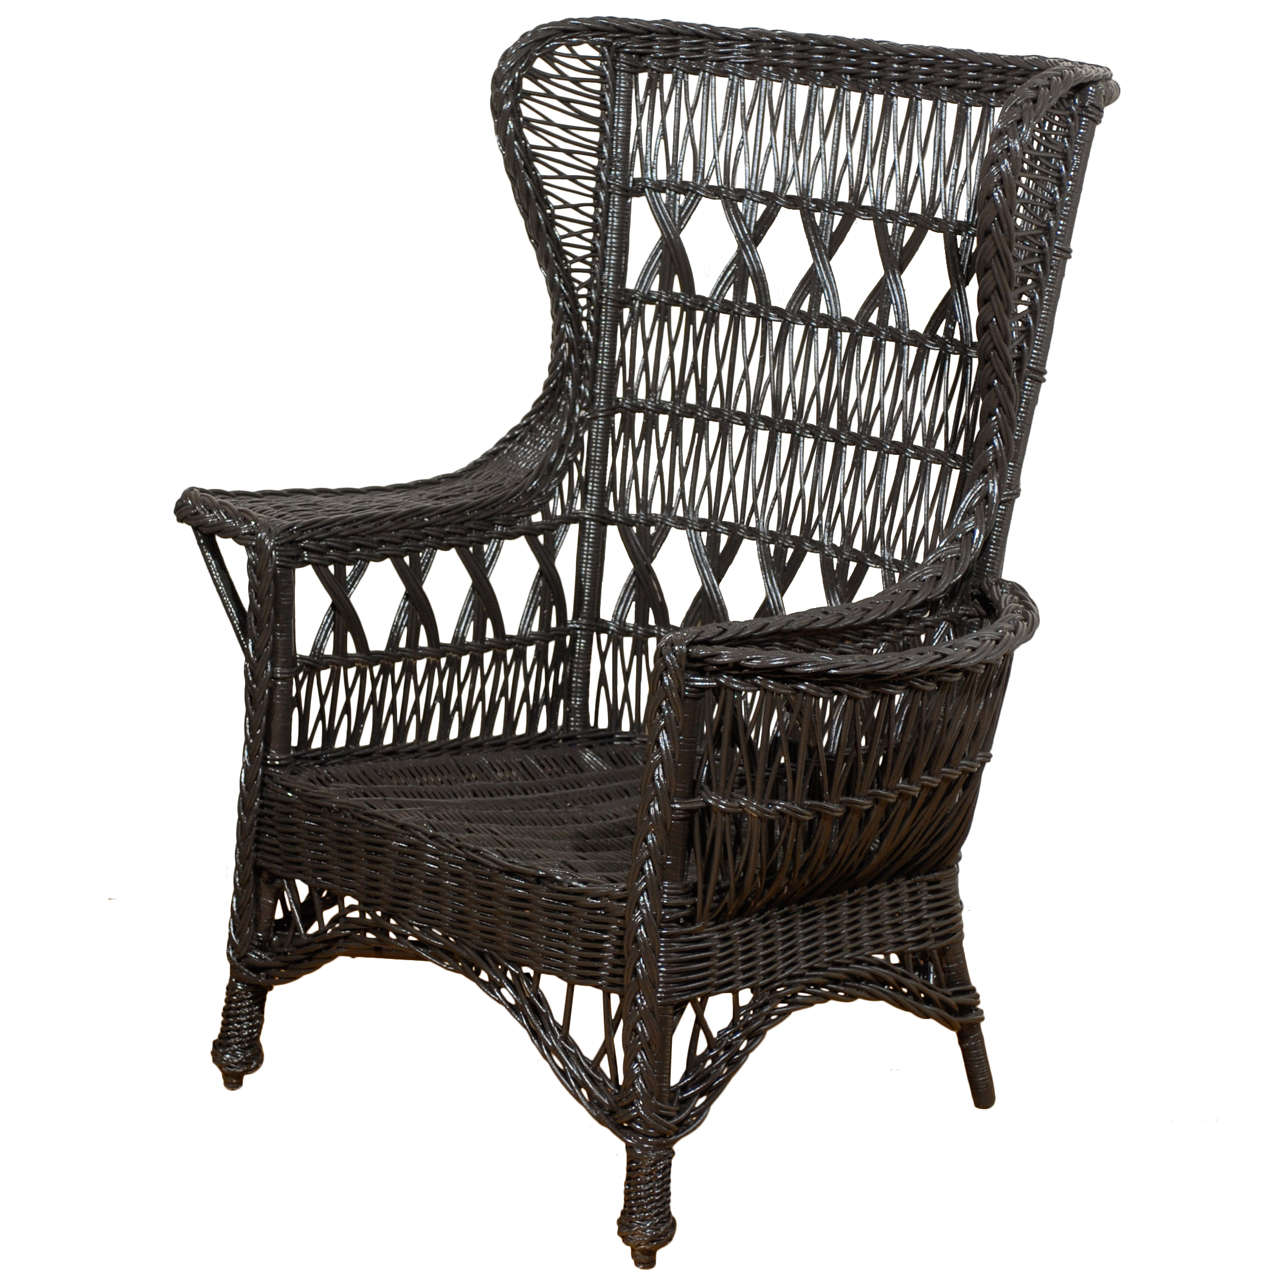 Antique American Wicker Wing Chair with Magazine Pocket at ...